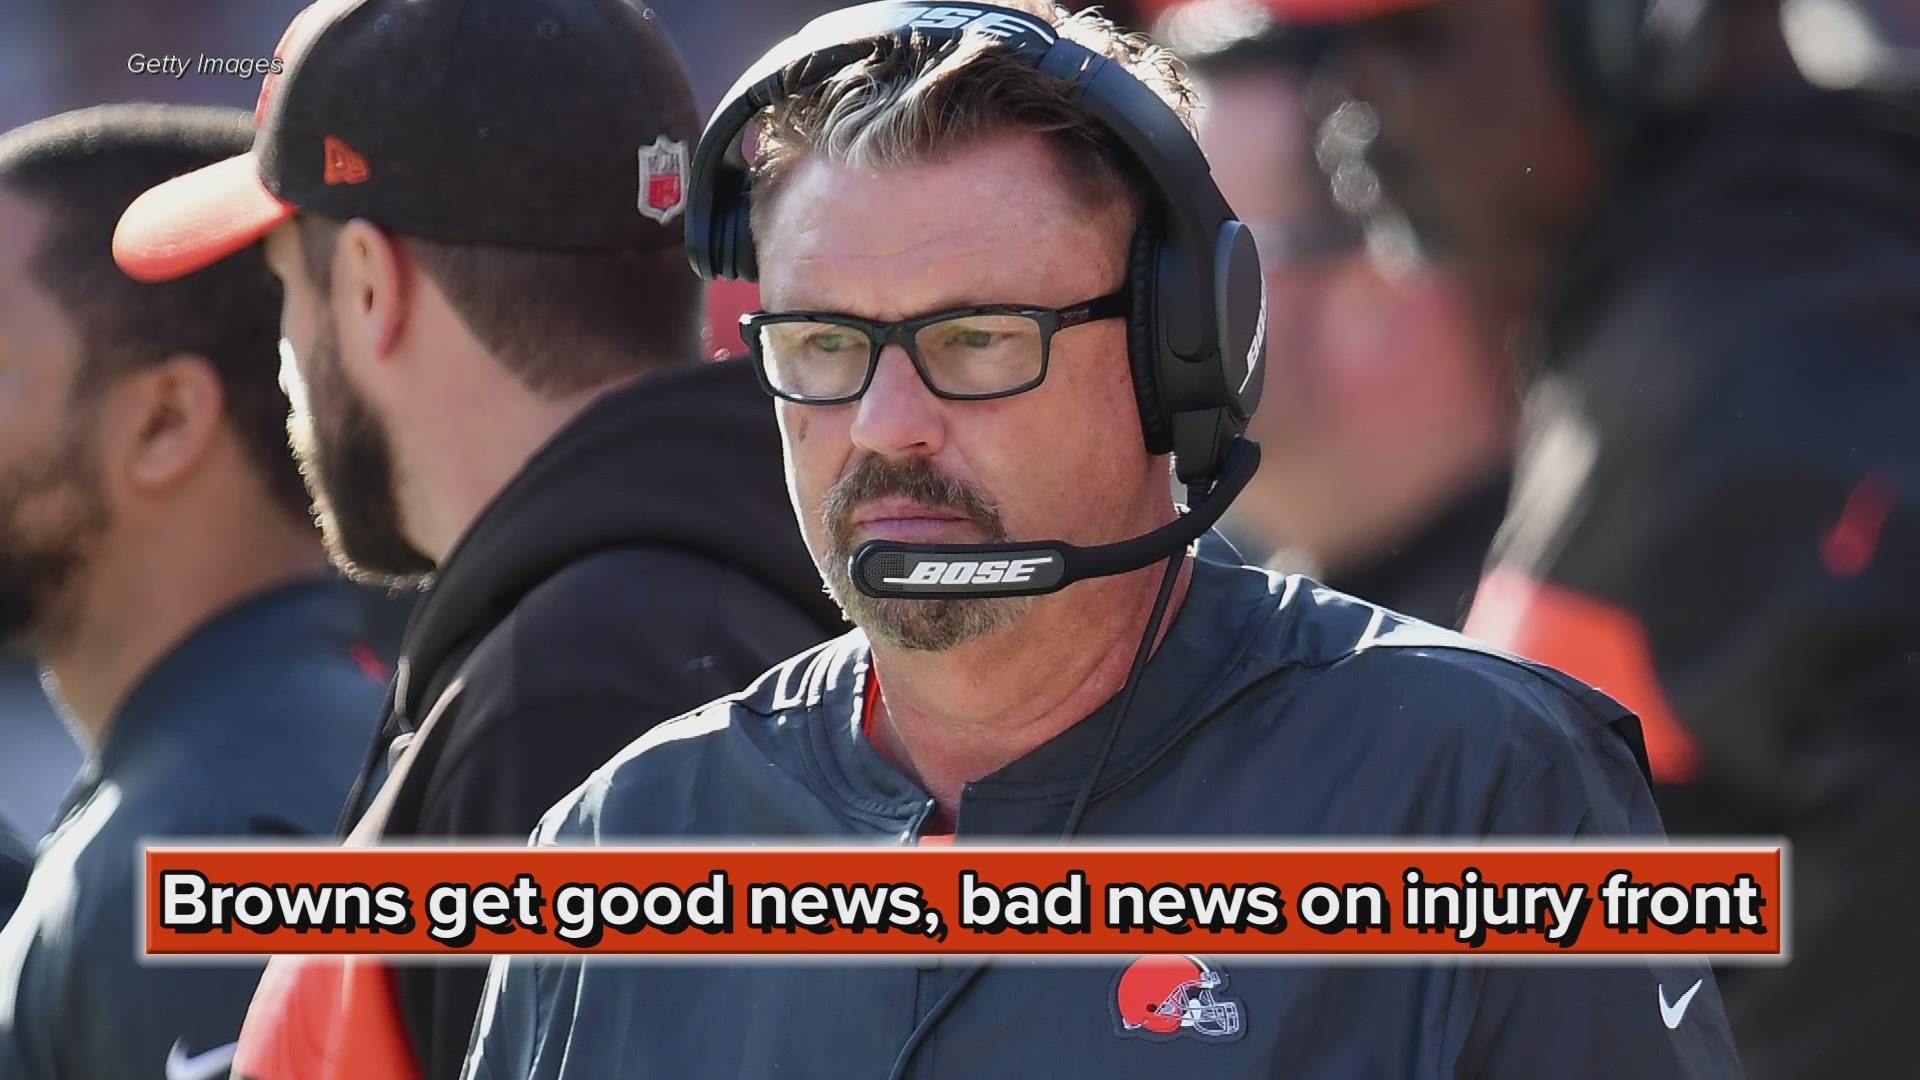 RECAP: Cleveland Browns get good news, bad news on injury front